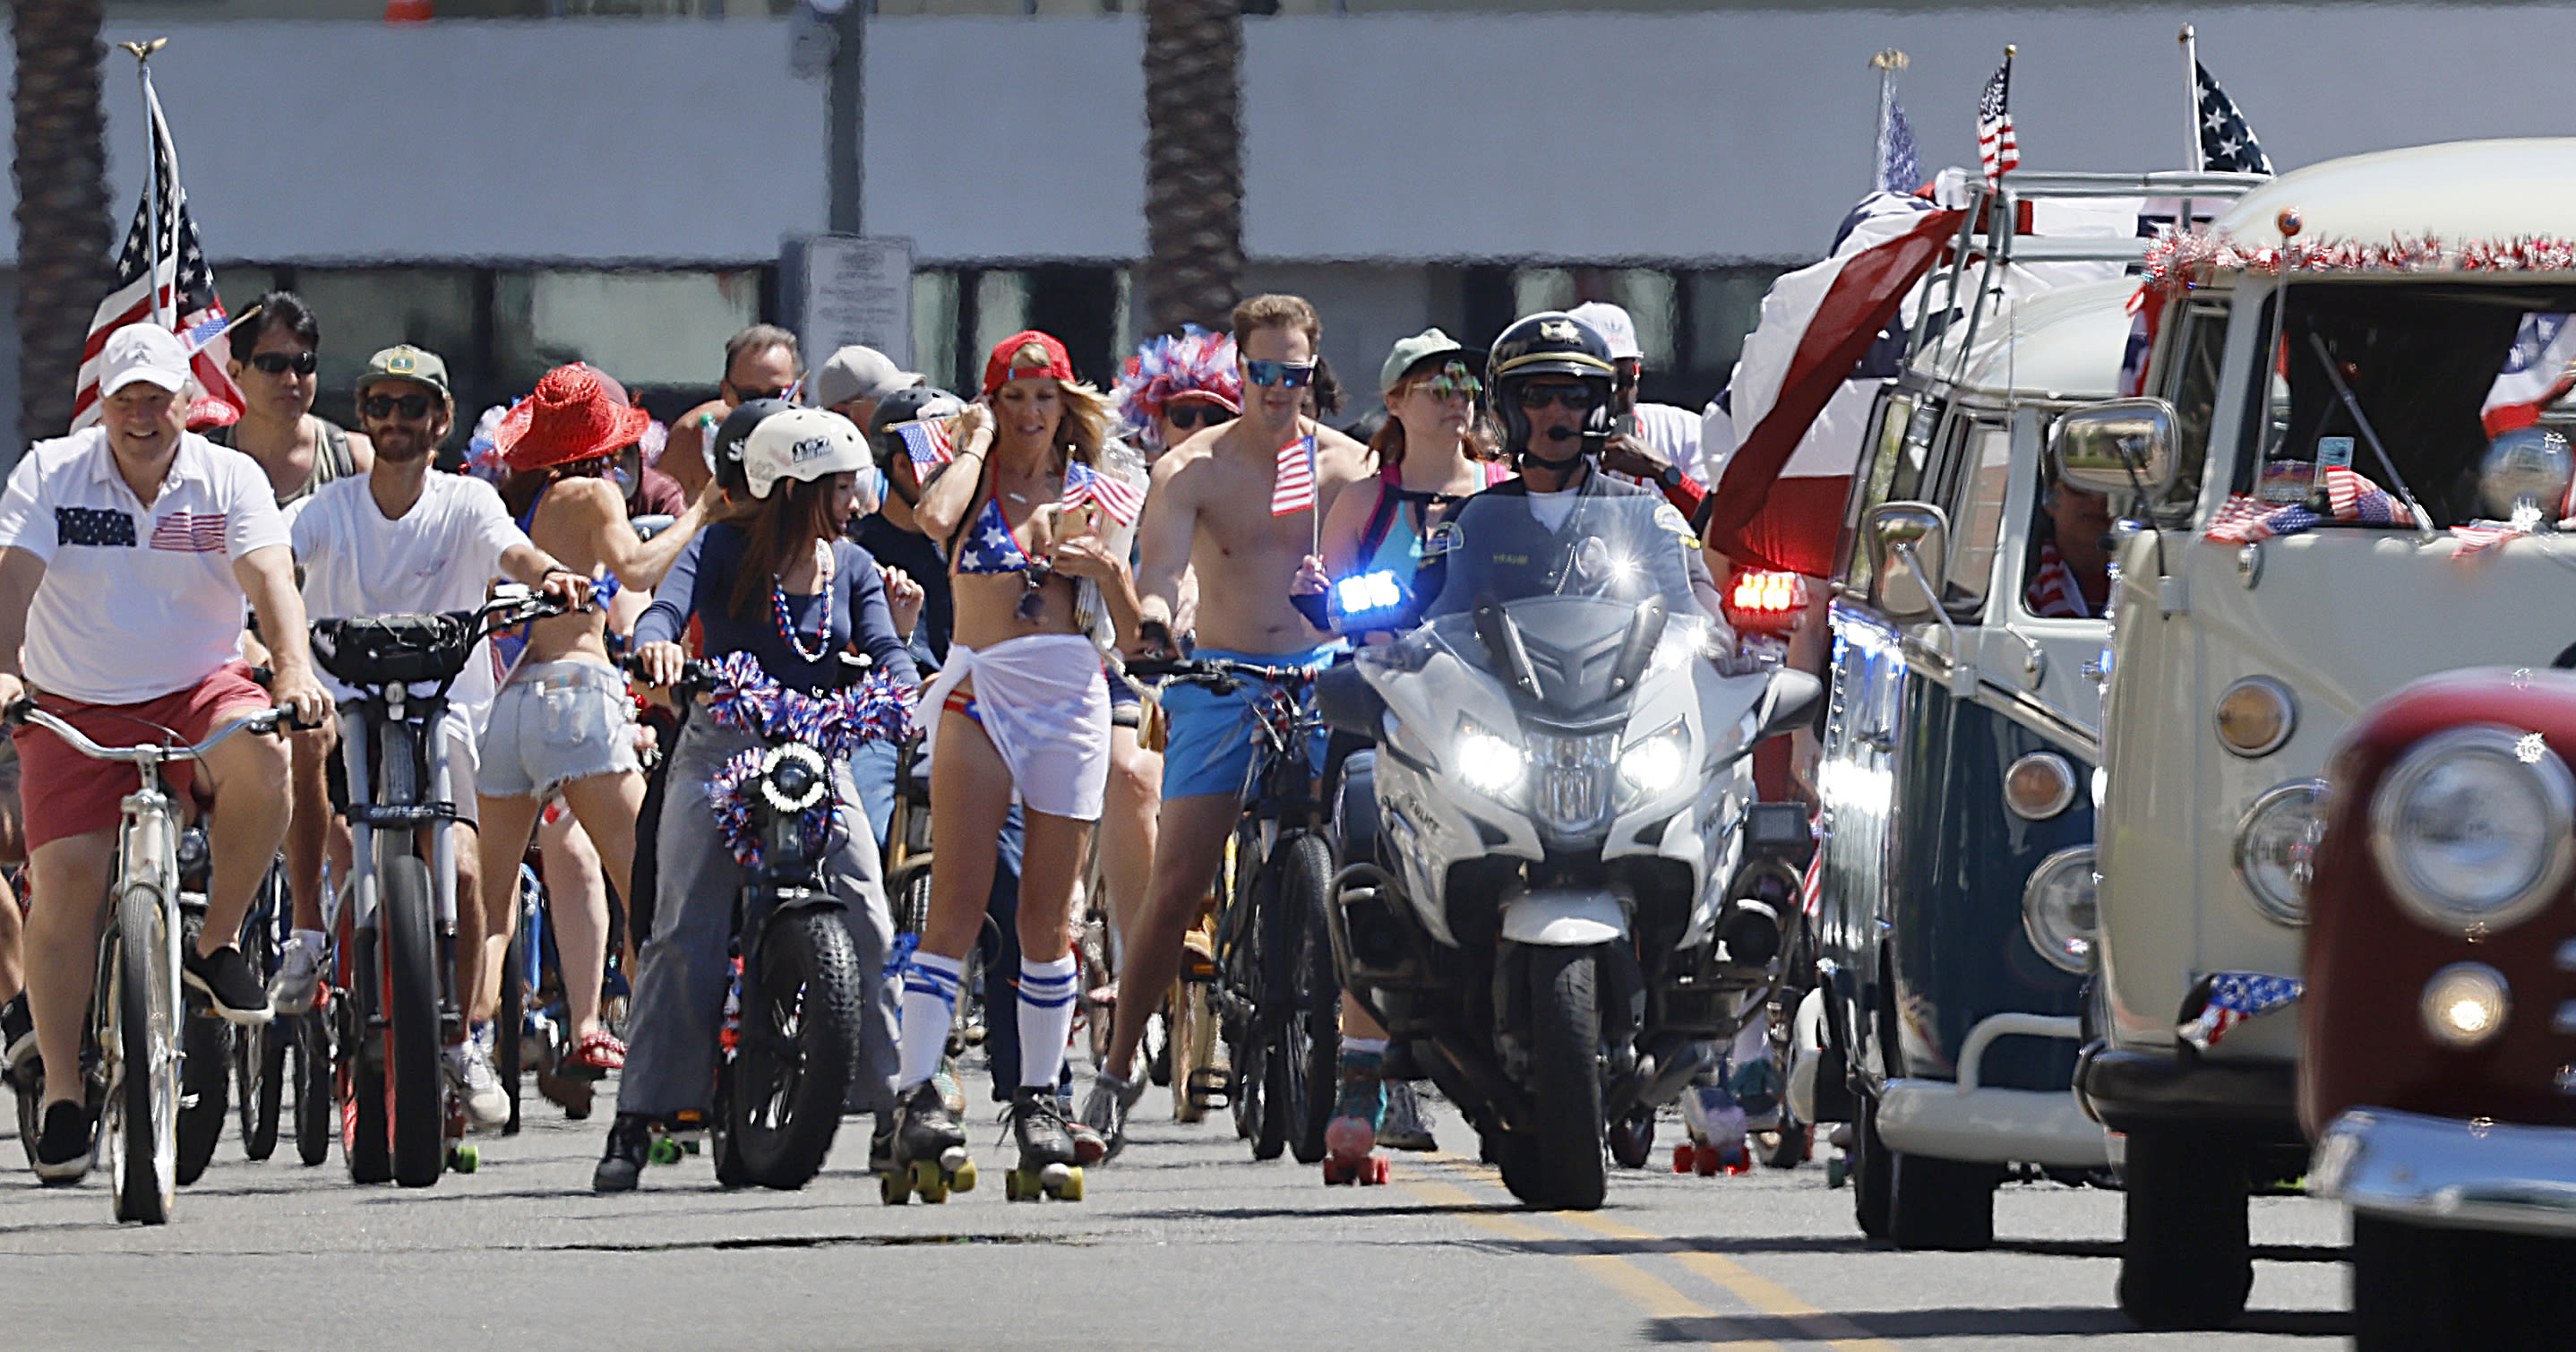 Photos: Celebrating the Fourth of July in Southern California